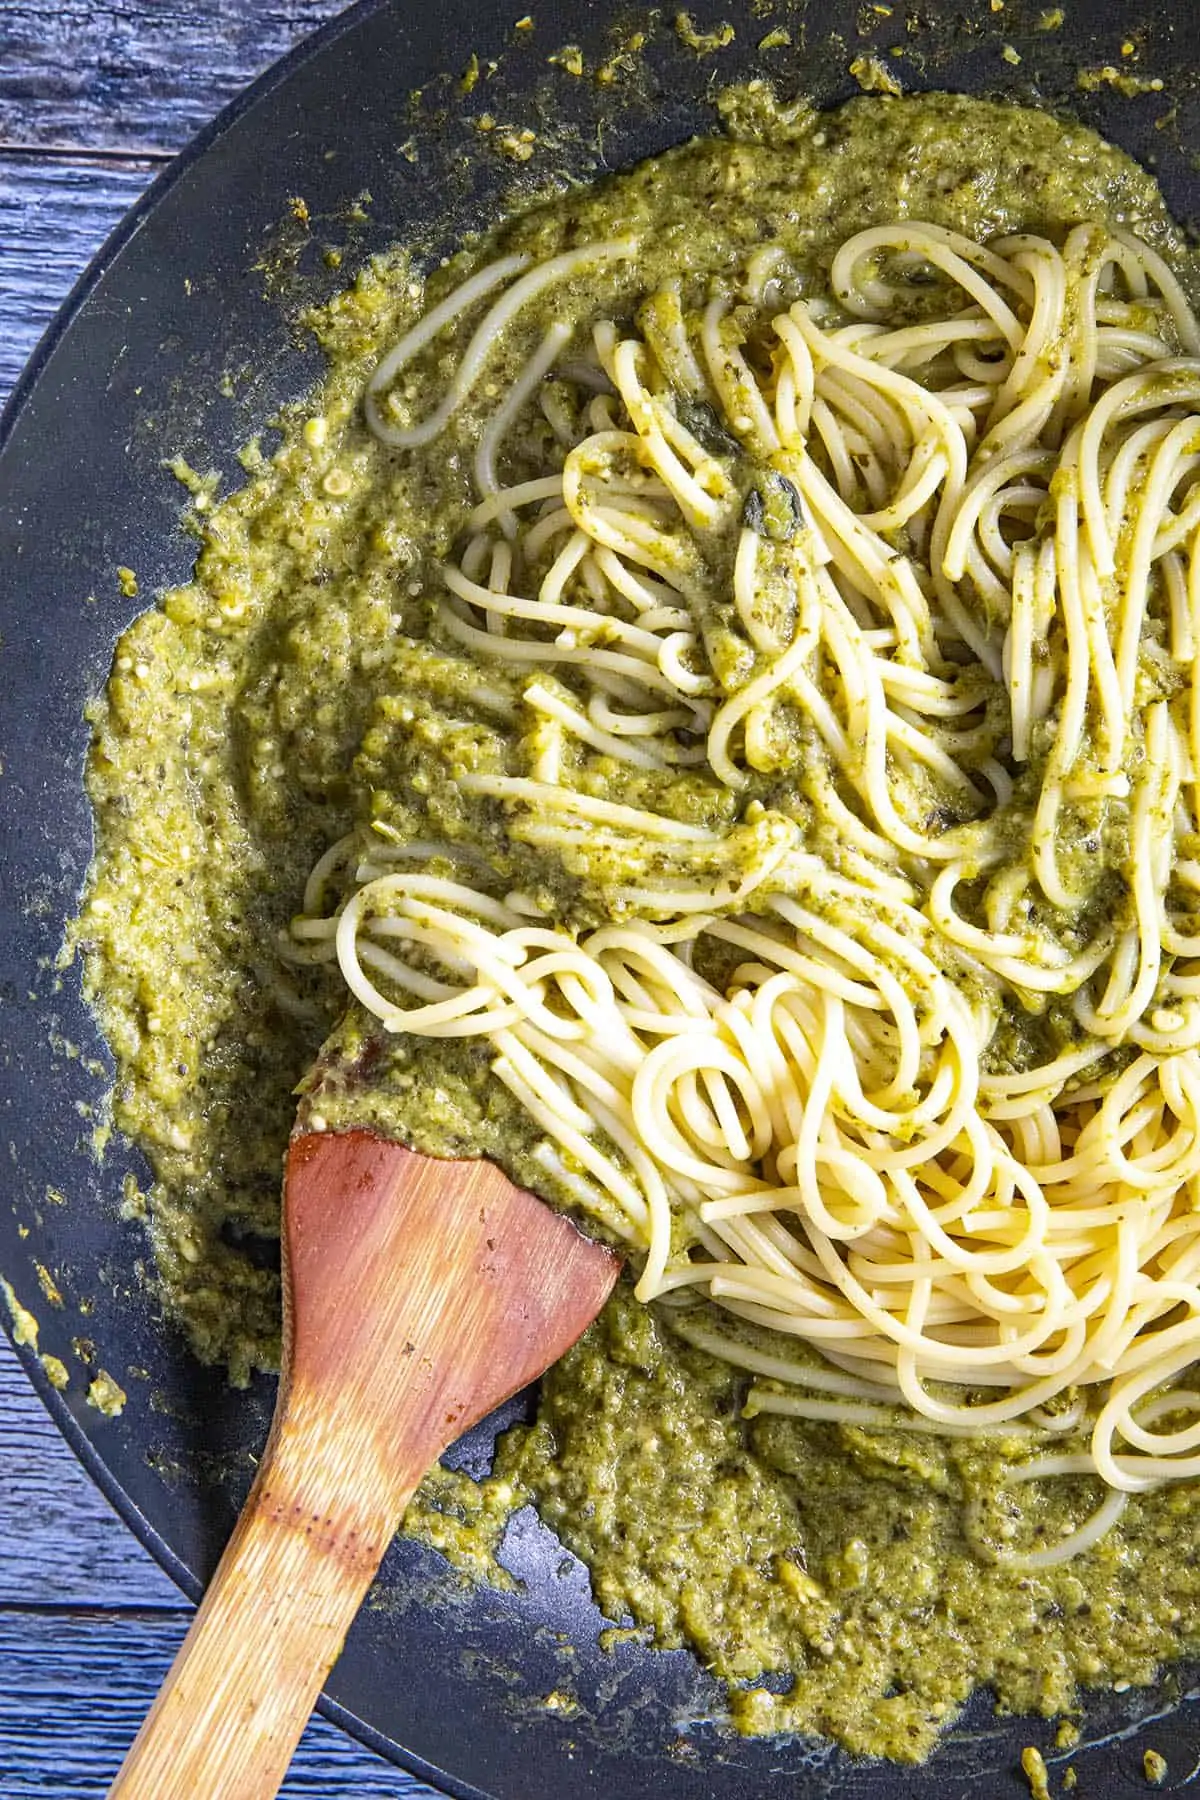 Swirling cooked spaghetti noodles into the Spaghetti Verde sauce